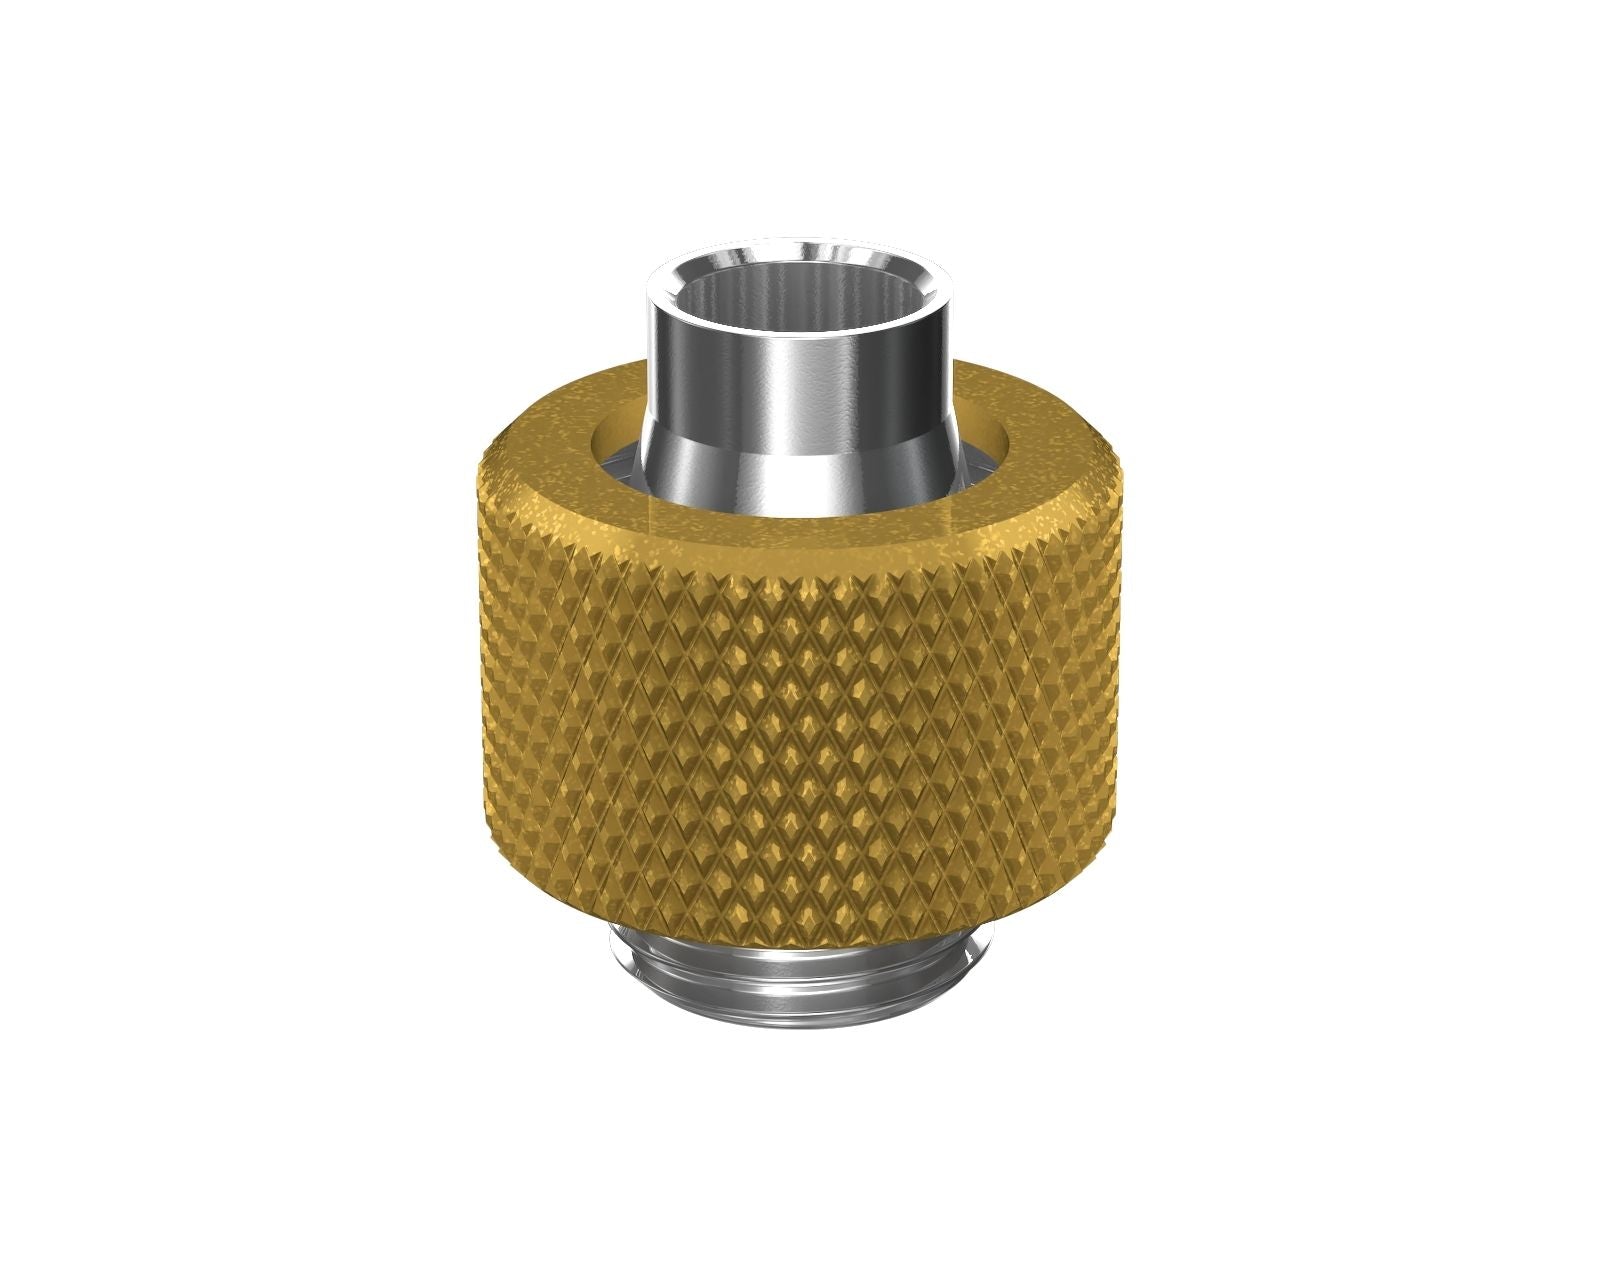 PrimoChill SecureFit SX - Premium Compression Fitting For 3/8in ID x 1/2in OD Flexible Tubing (F-SFSX12) - Available in 20+ Colors, Custom Watercooling Loop Ready - Gold